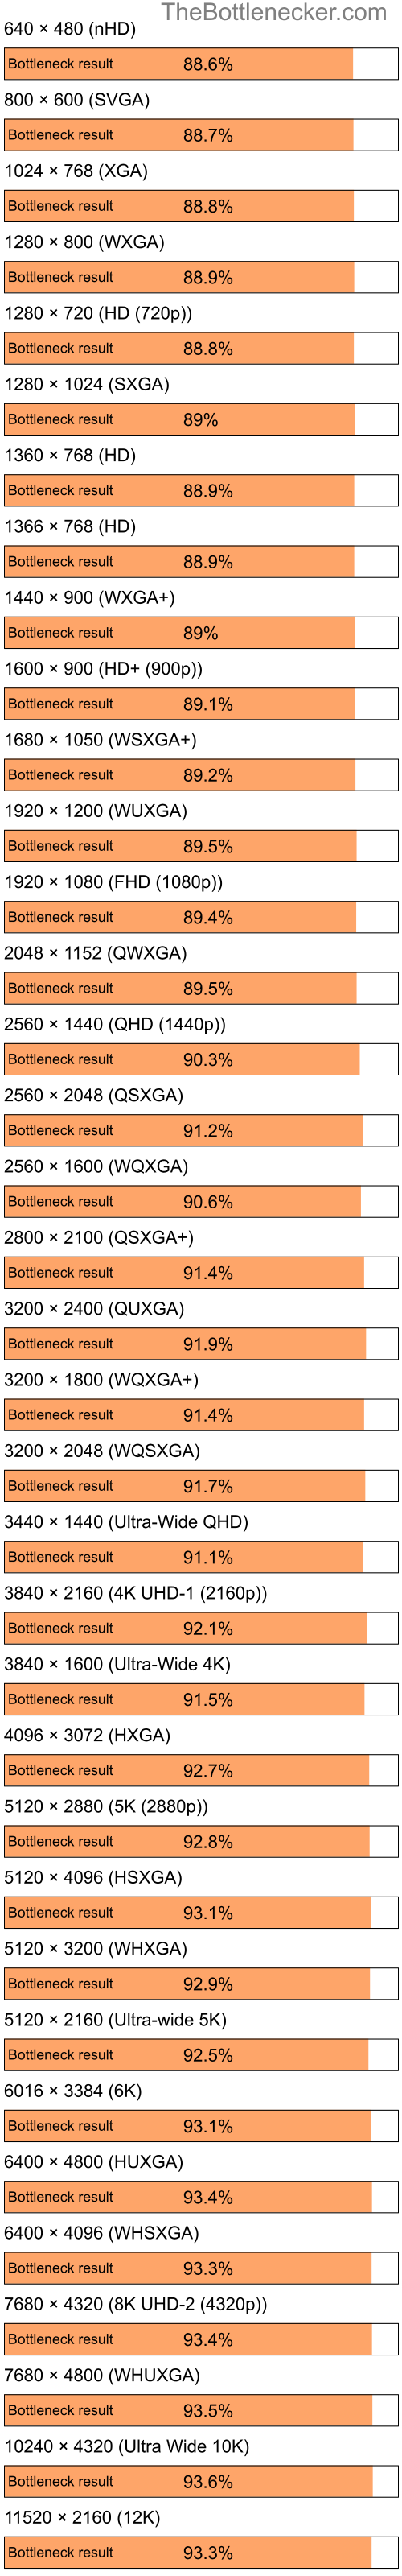 Bottleneck results by resolution for Intel Celeron M and NVIDIA GeForce4 Ti 4600 in General Tasks